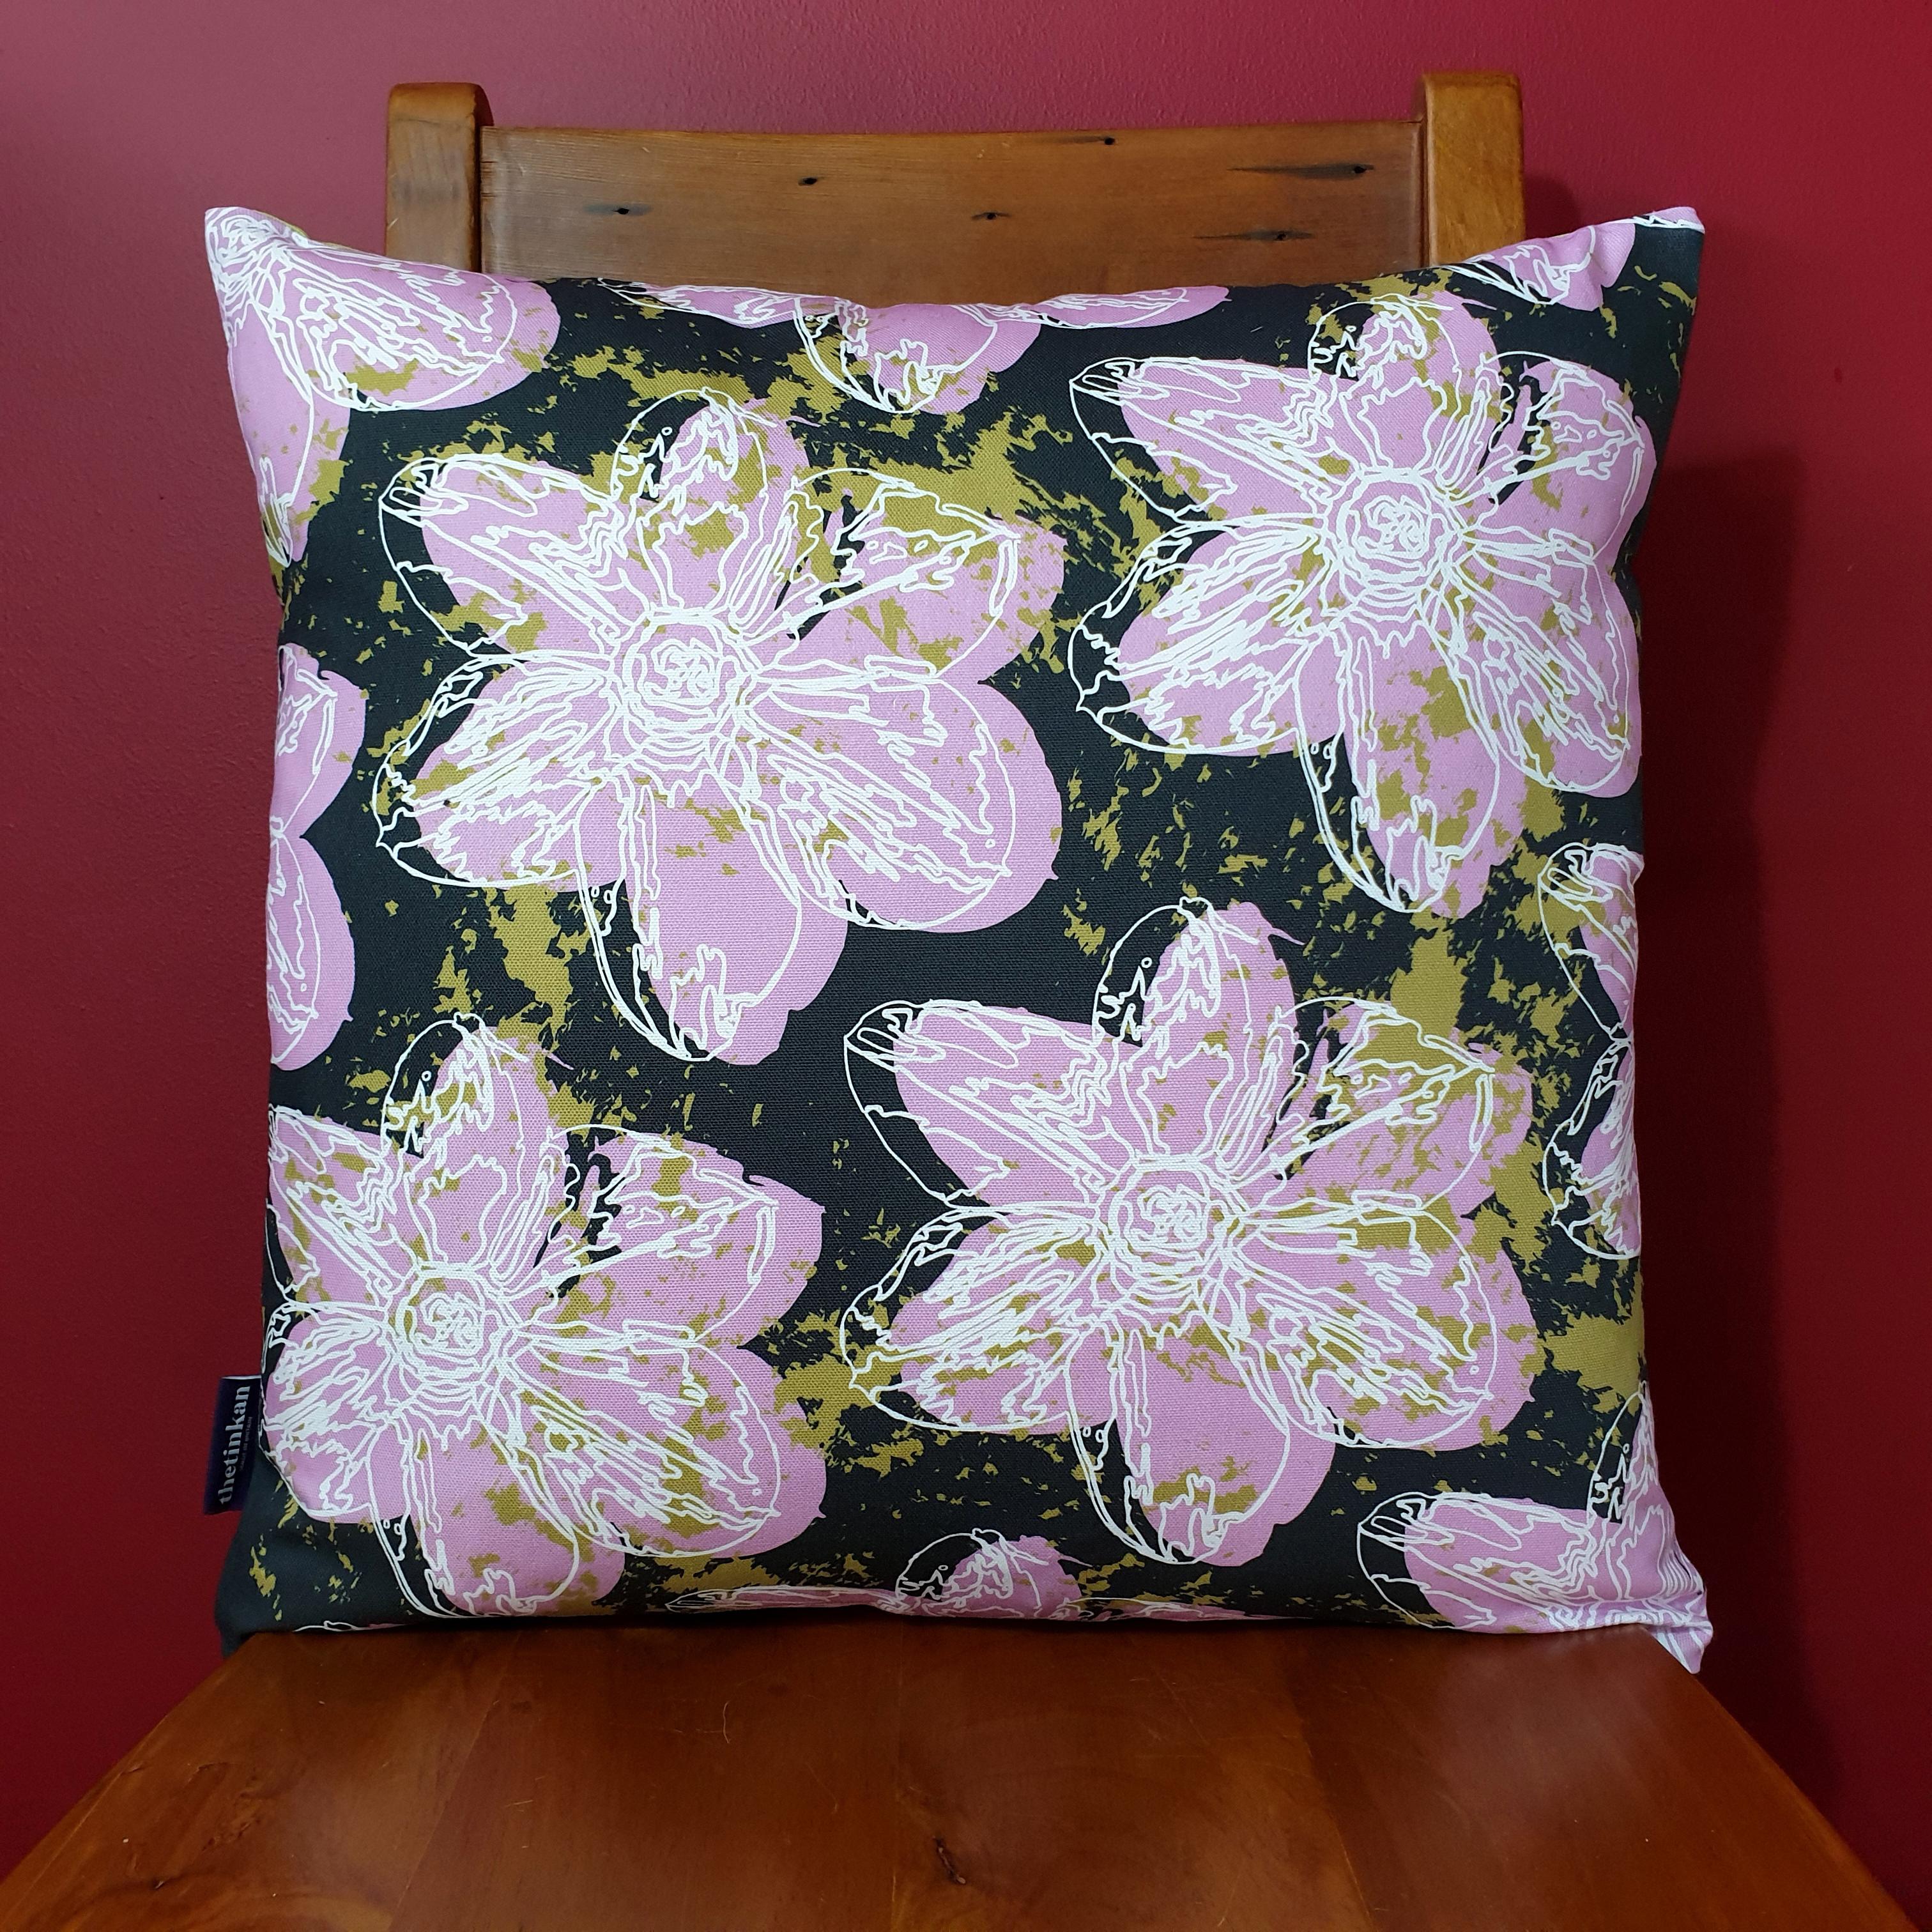 Double-sided 51cm square Flower Splash cushion designed by thetinkan. Candy pink narcissus flower with white traced outline set within a dark charcoal grey background with olive green paint splashes. Available with an optional luxury cushion inner pad. VIEW PRODUCT >>